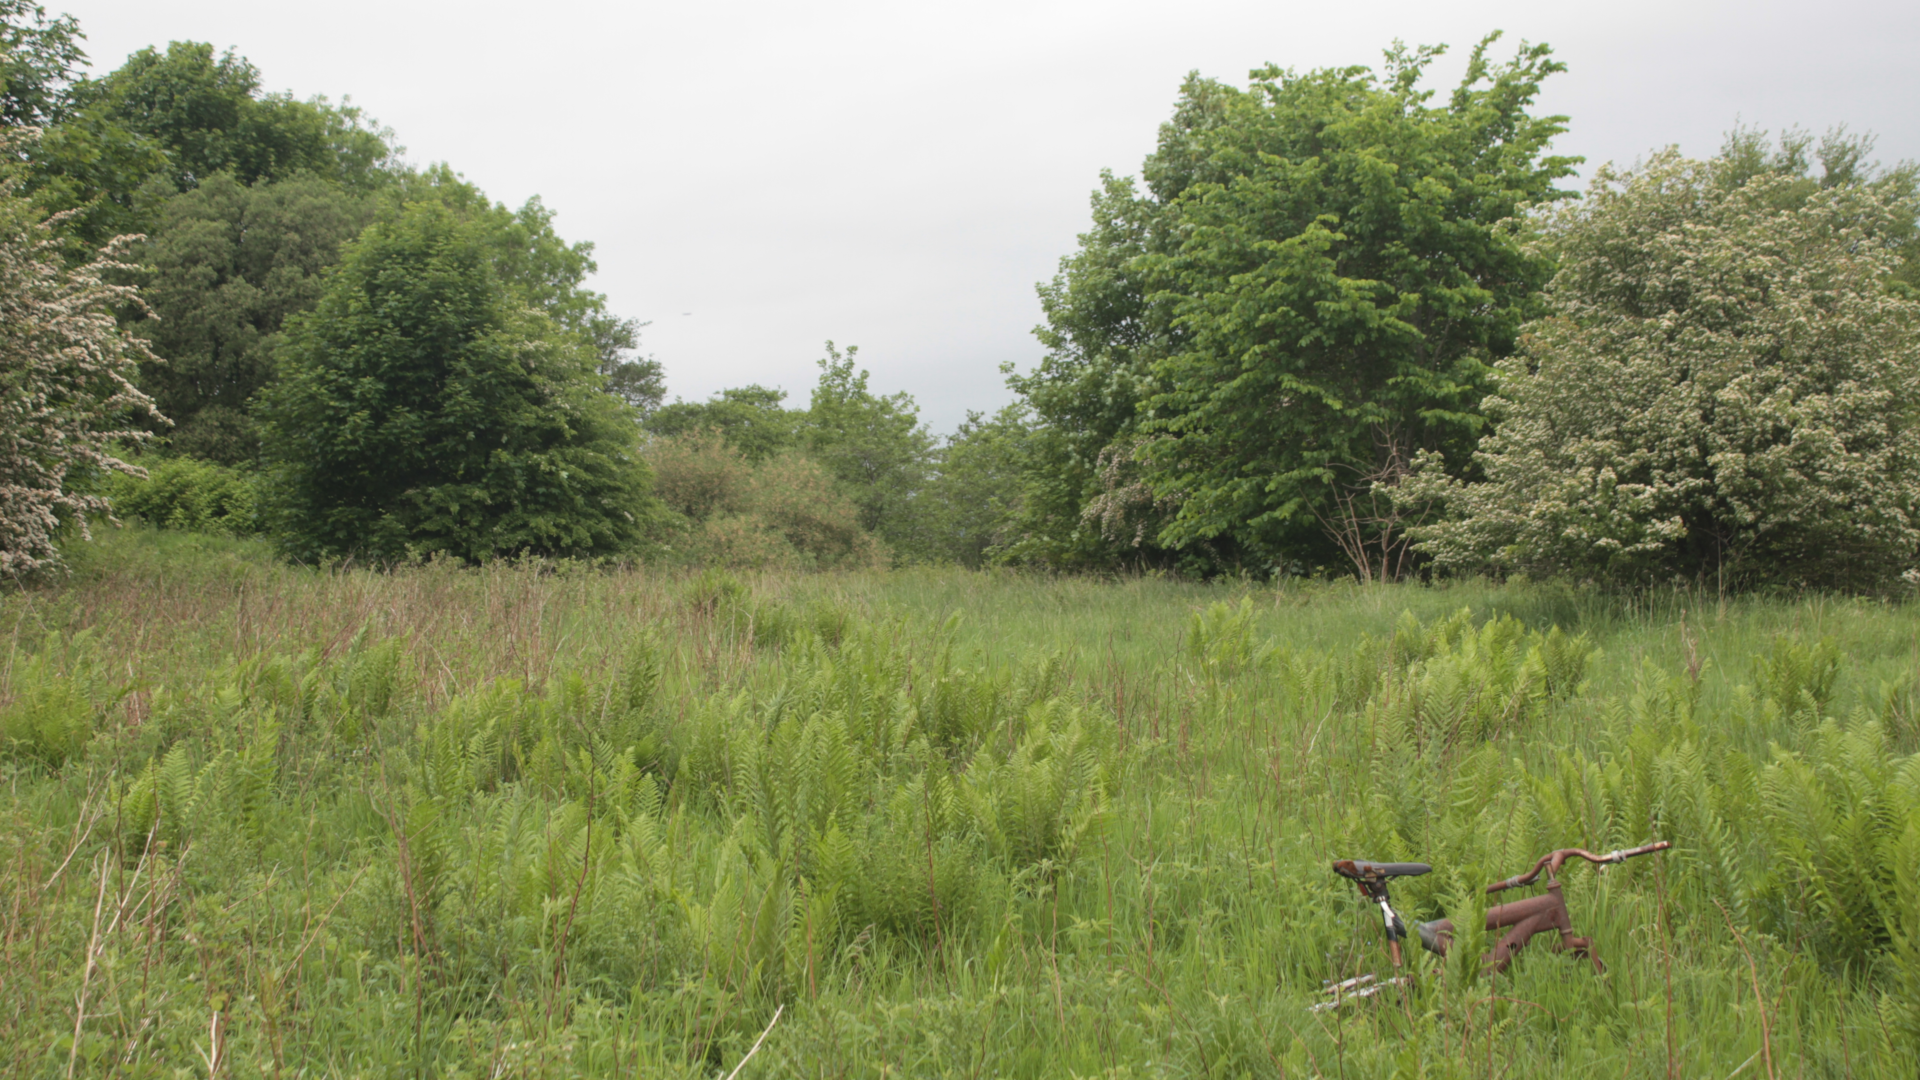 An overgrown field with trees at the back and a rusty bicycle frame in the foreground